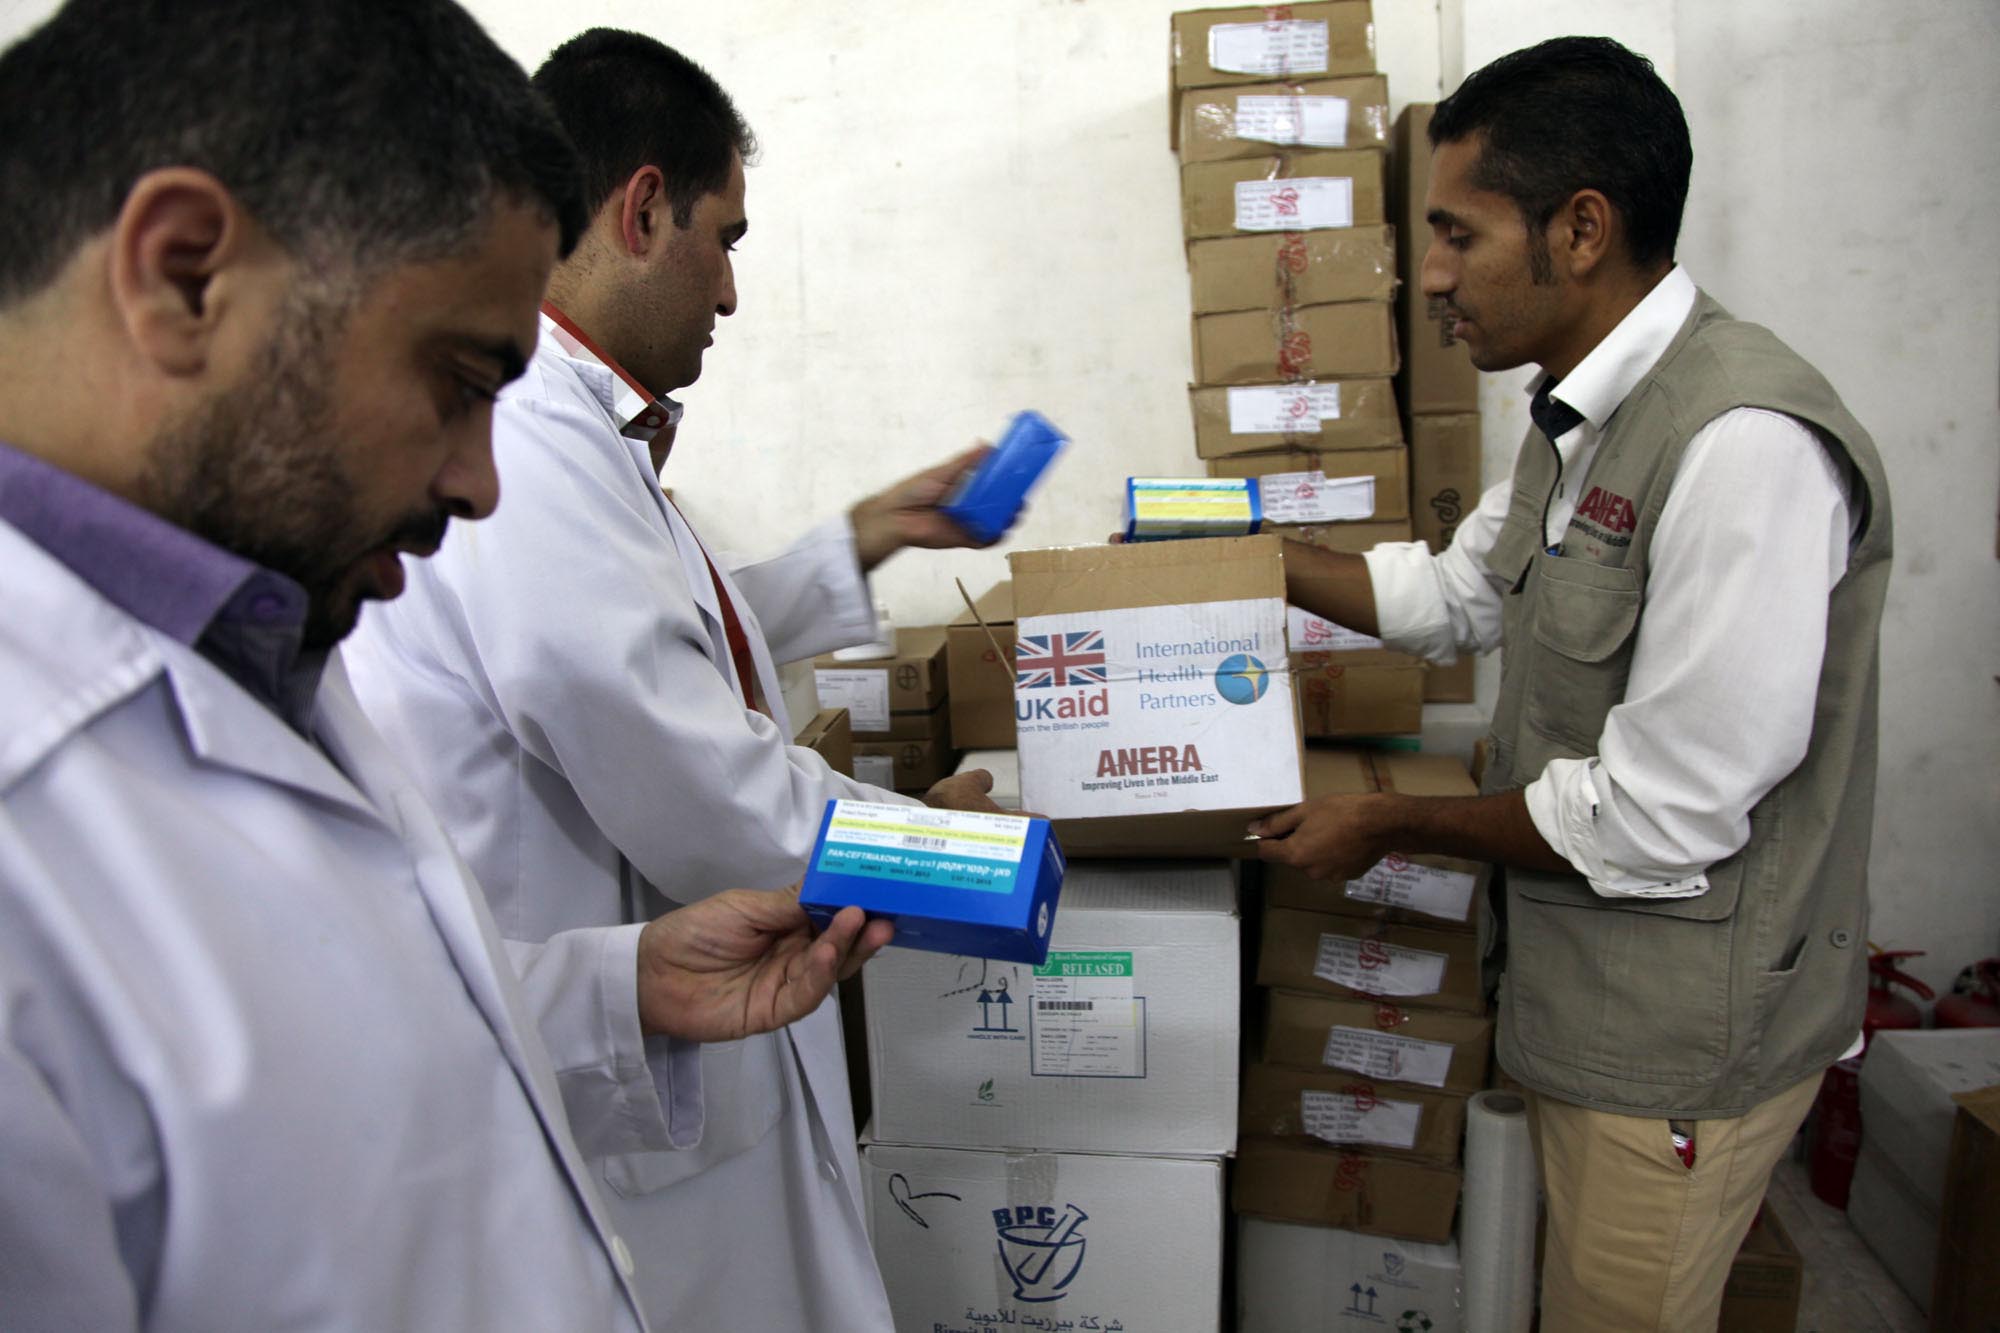 Anera in-kind staff delivers medicines for burn victims to Gaza hospital.